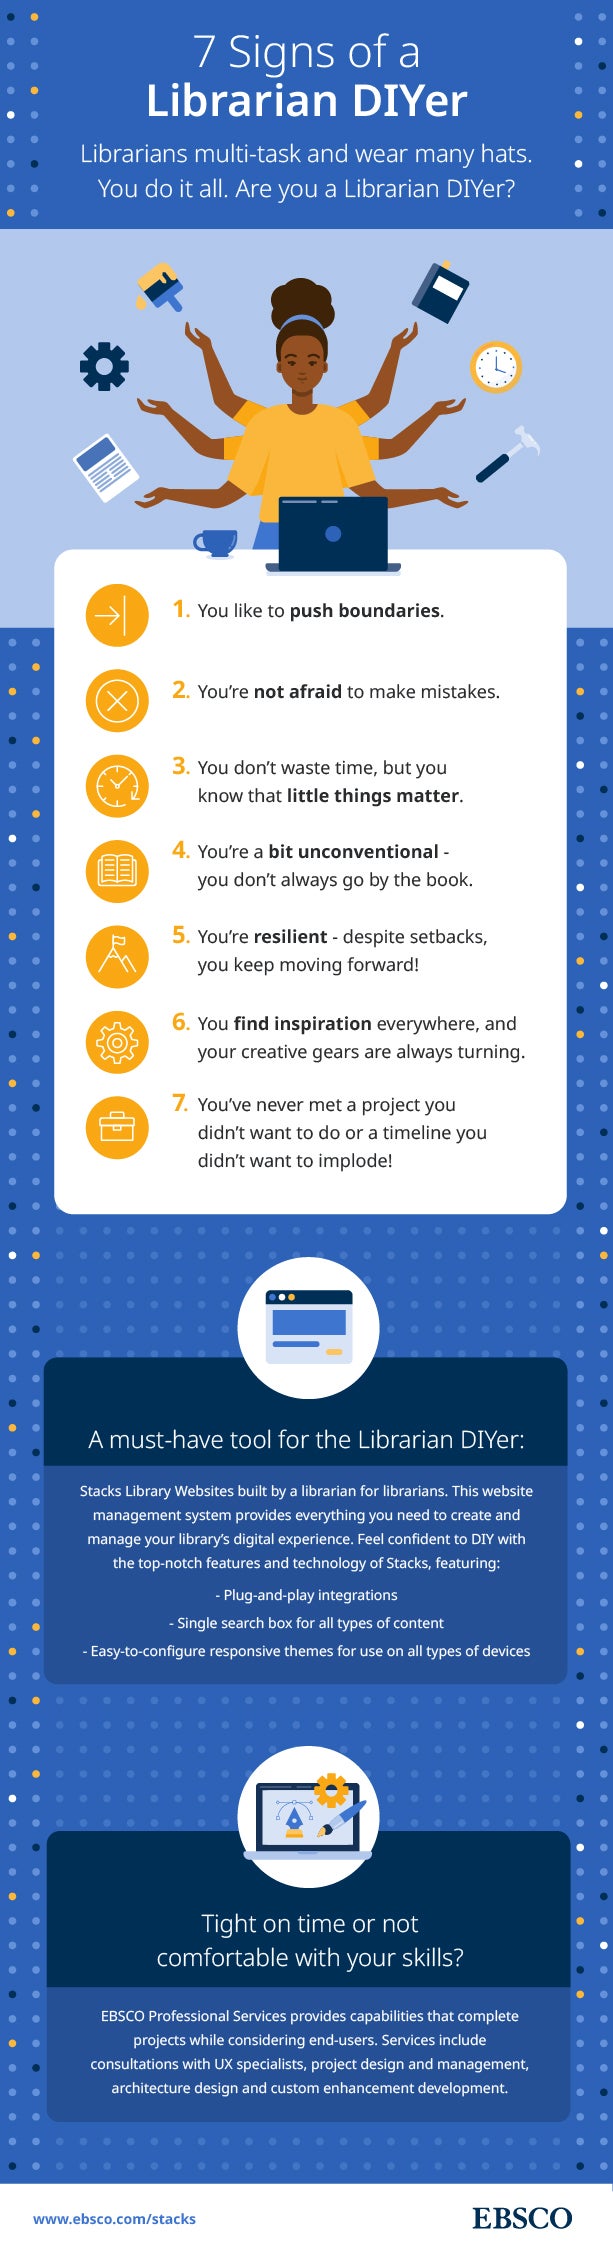  Signs of a Librarian DIYer Infographic   